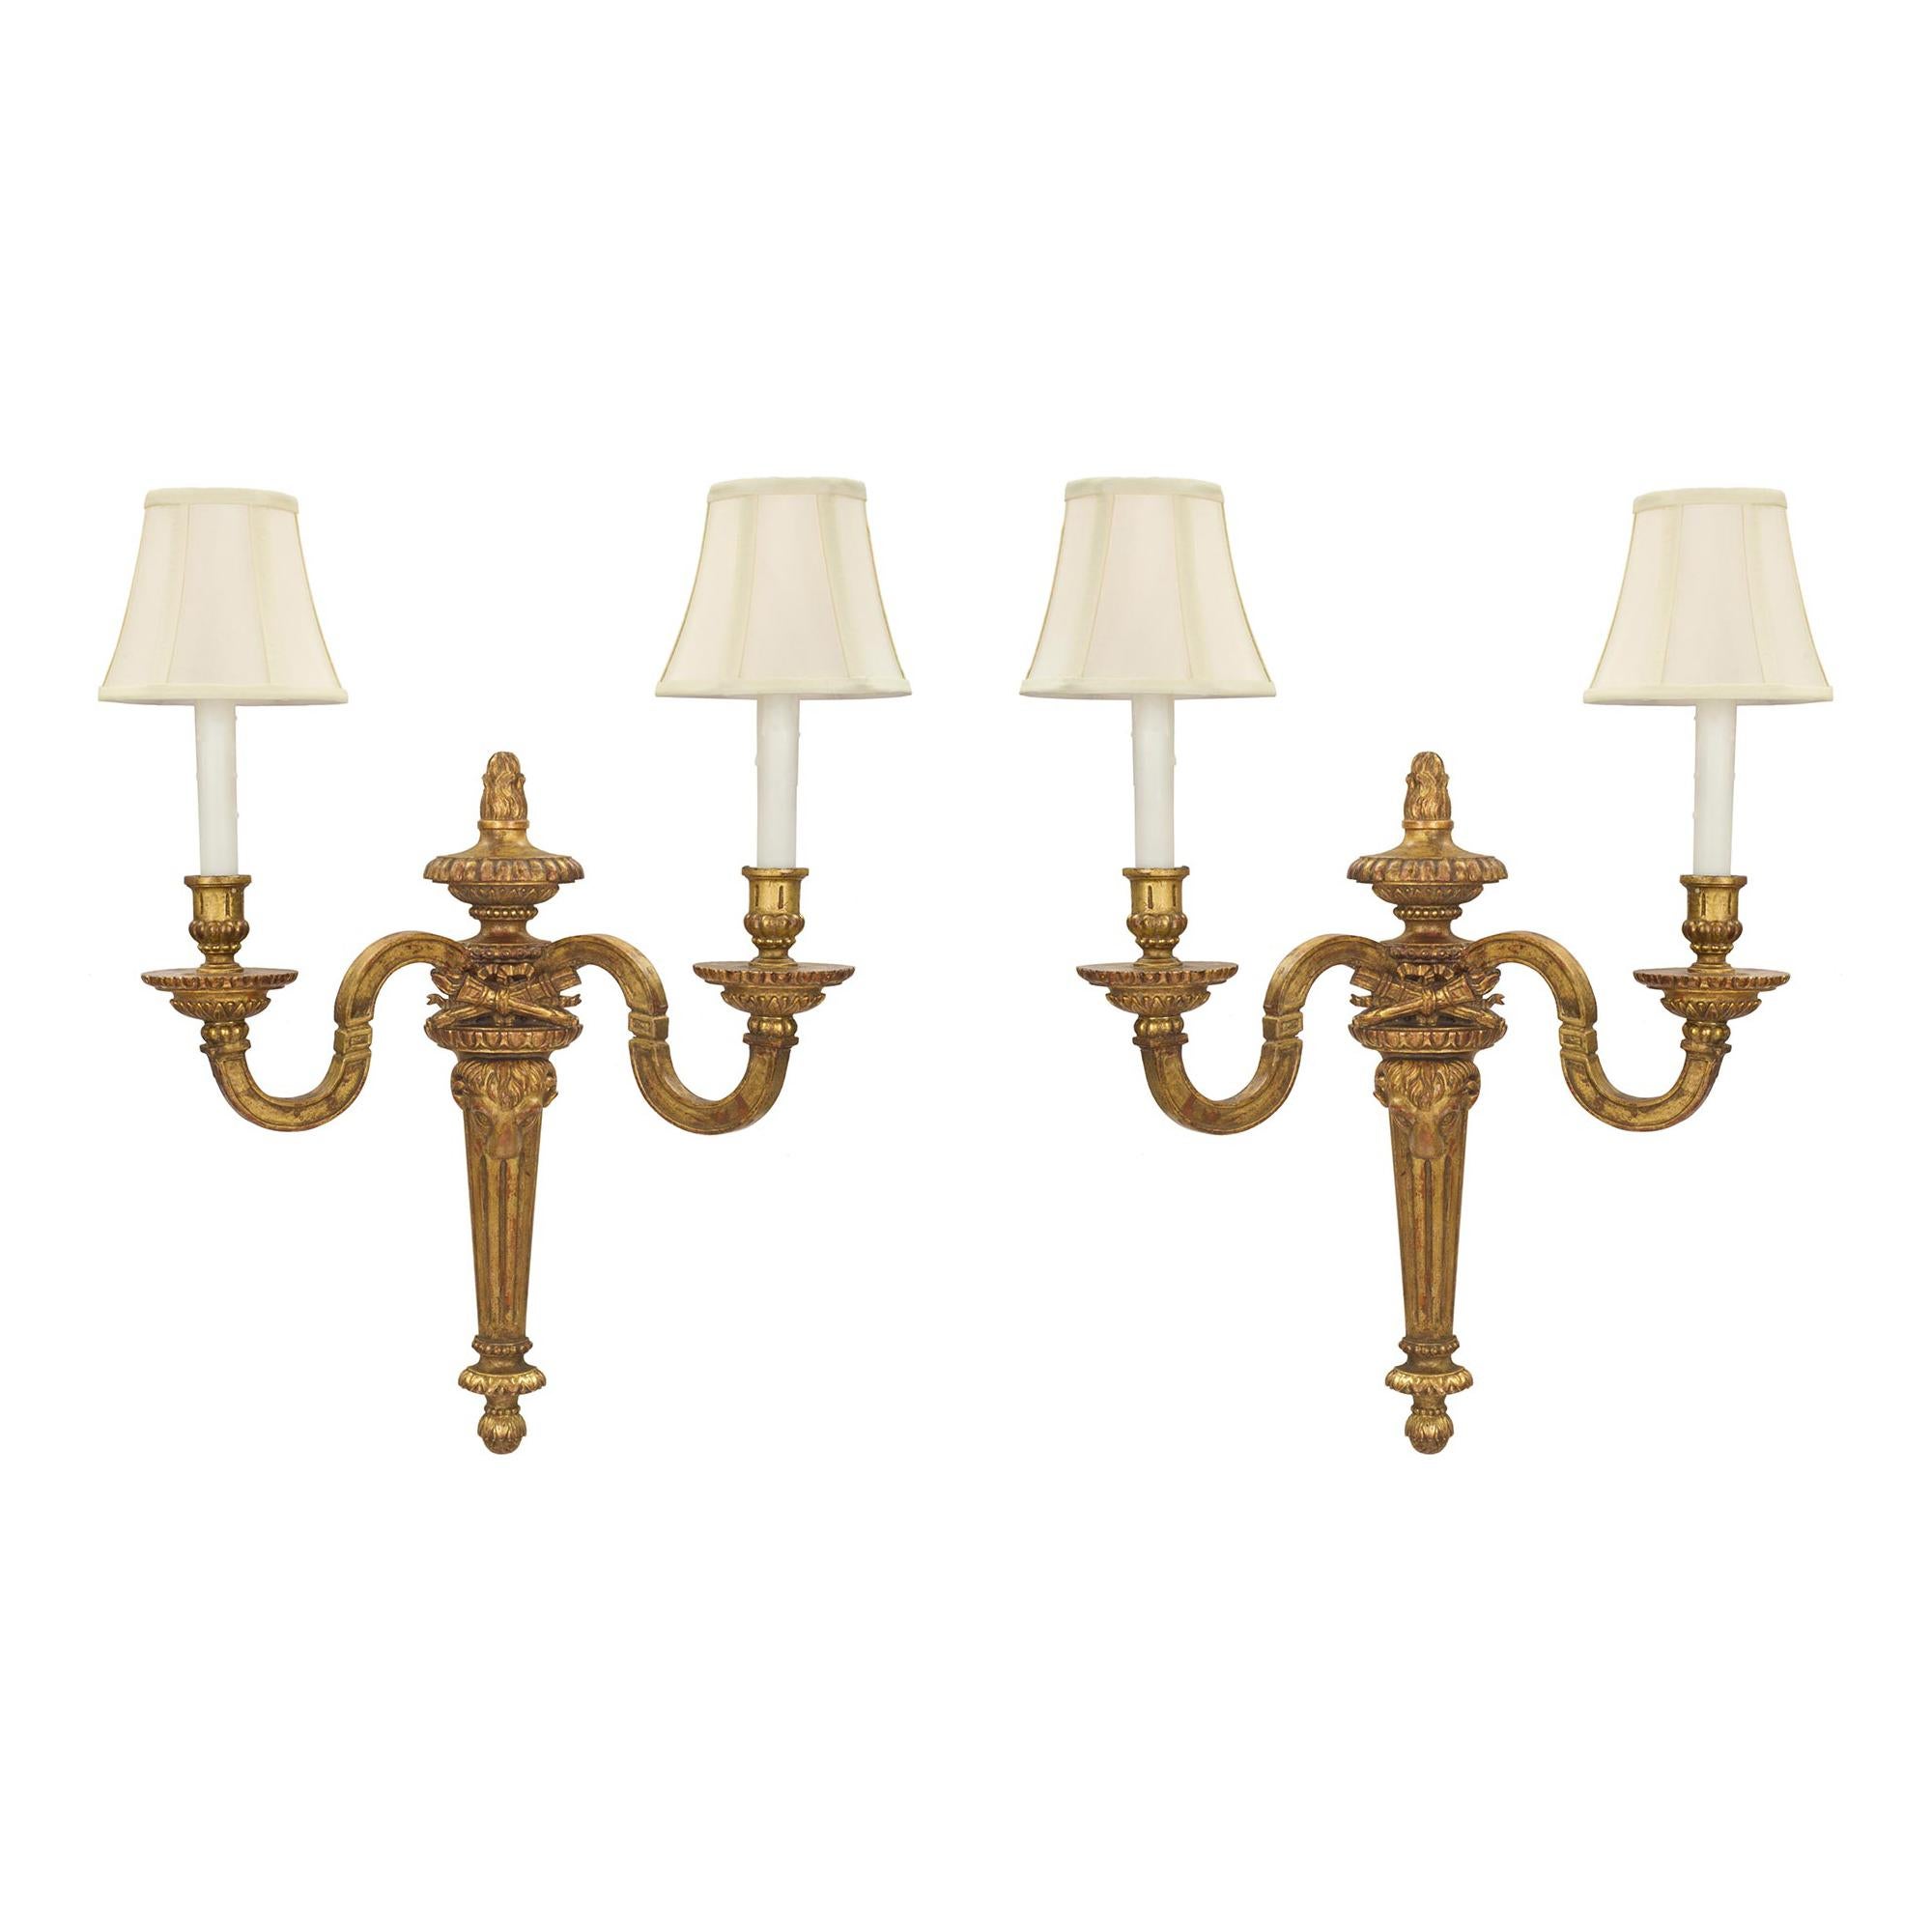 Pair of Italian Late 19th Century Louis XVI Style Giltwood Sconces For Sale